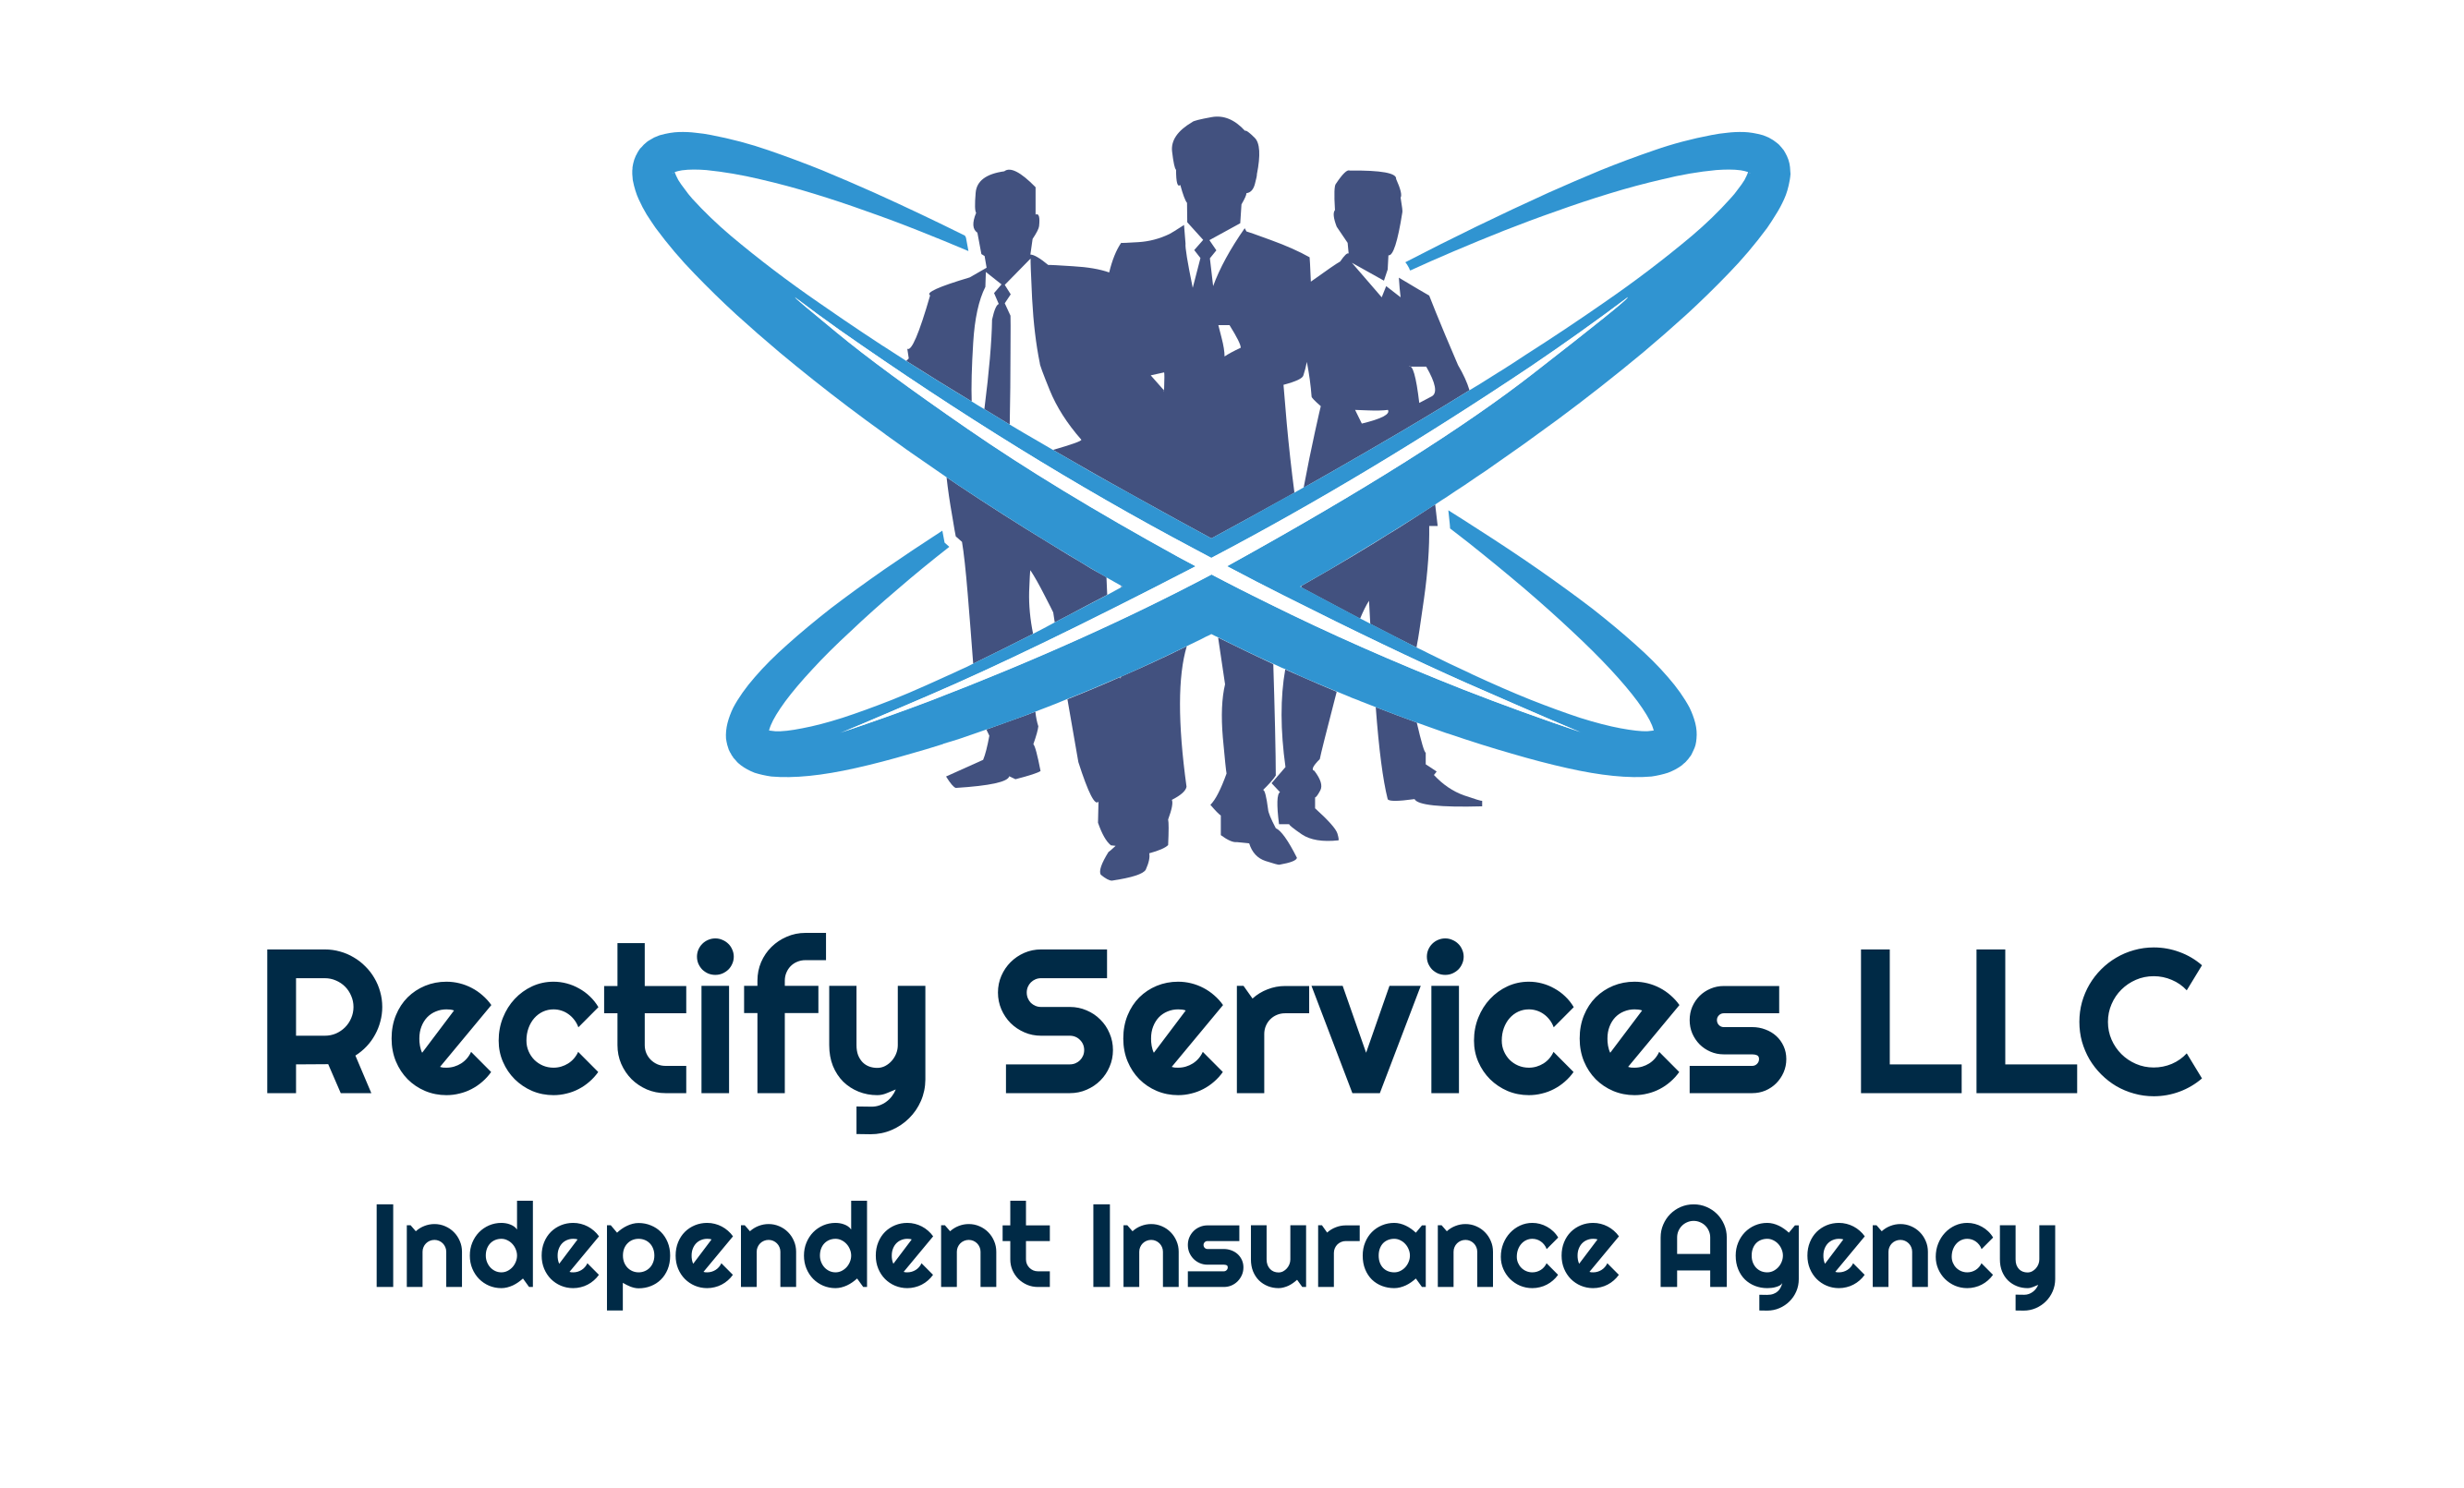 Rectify Services LLC